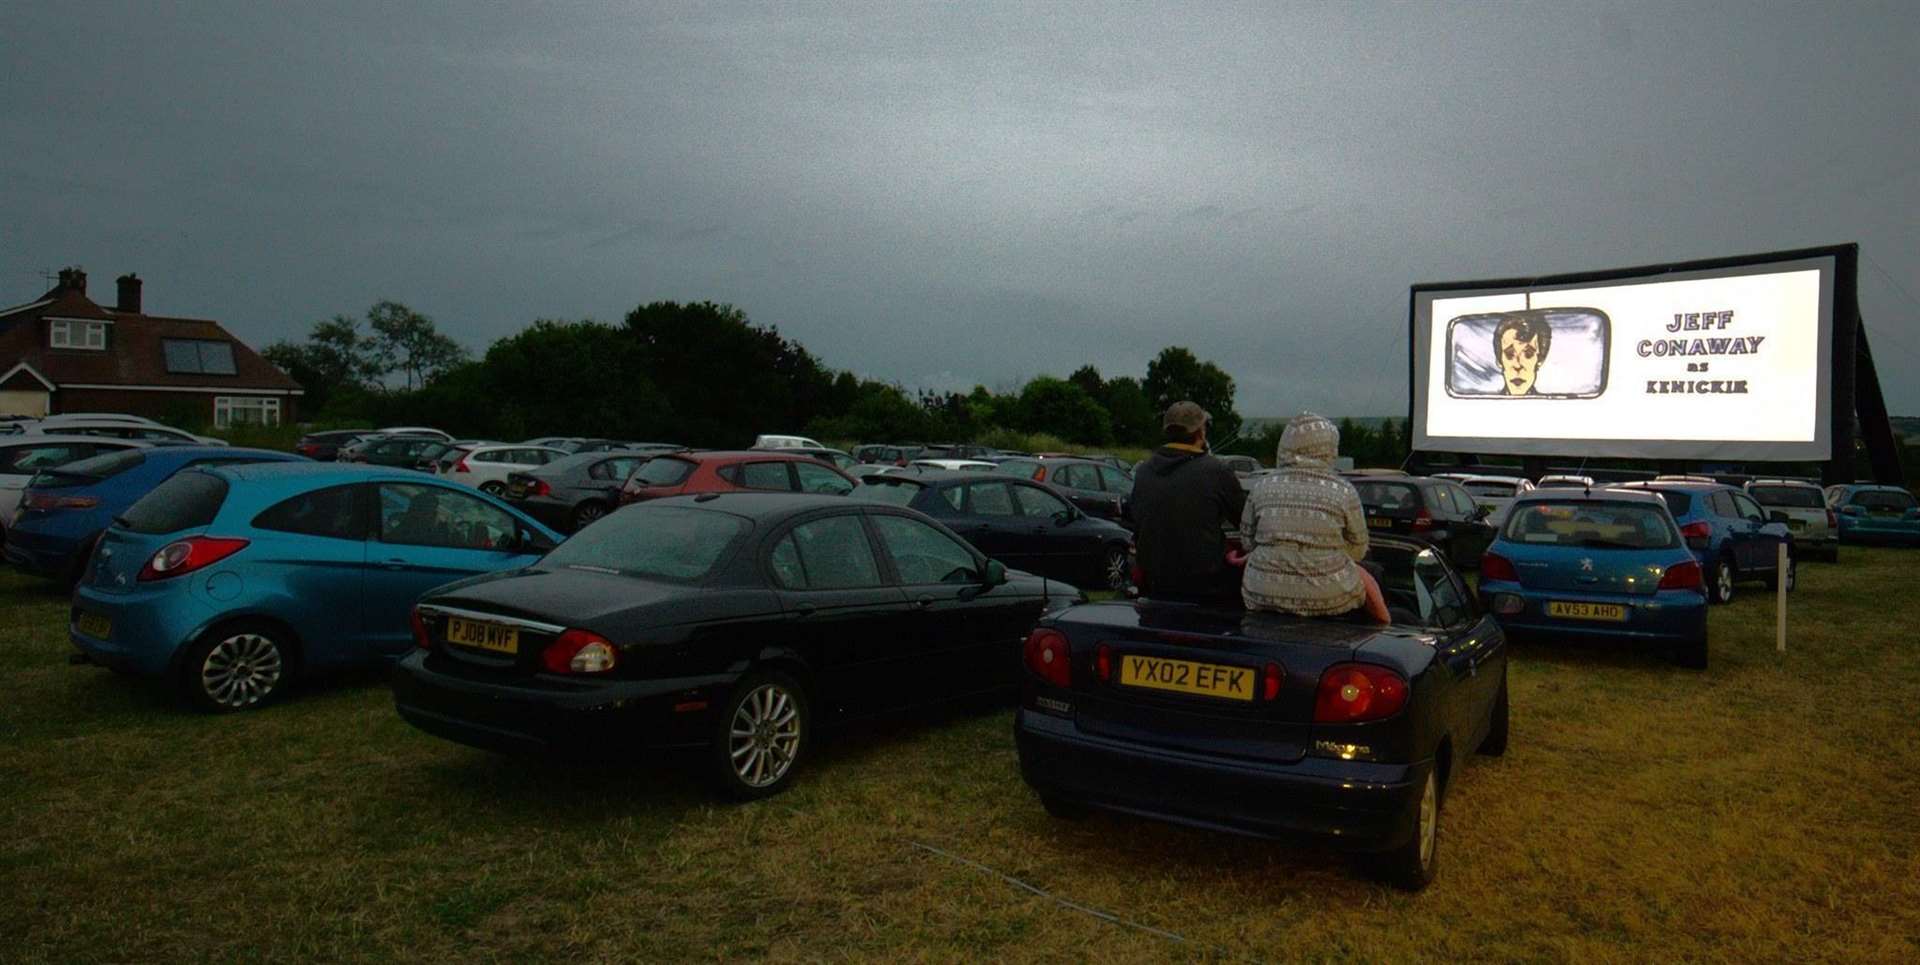 Moonlight Drive-In Cinema has cancelled all showings at The Hop Farm